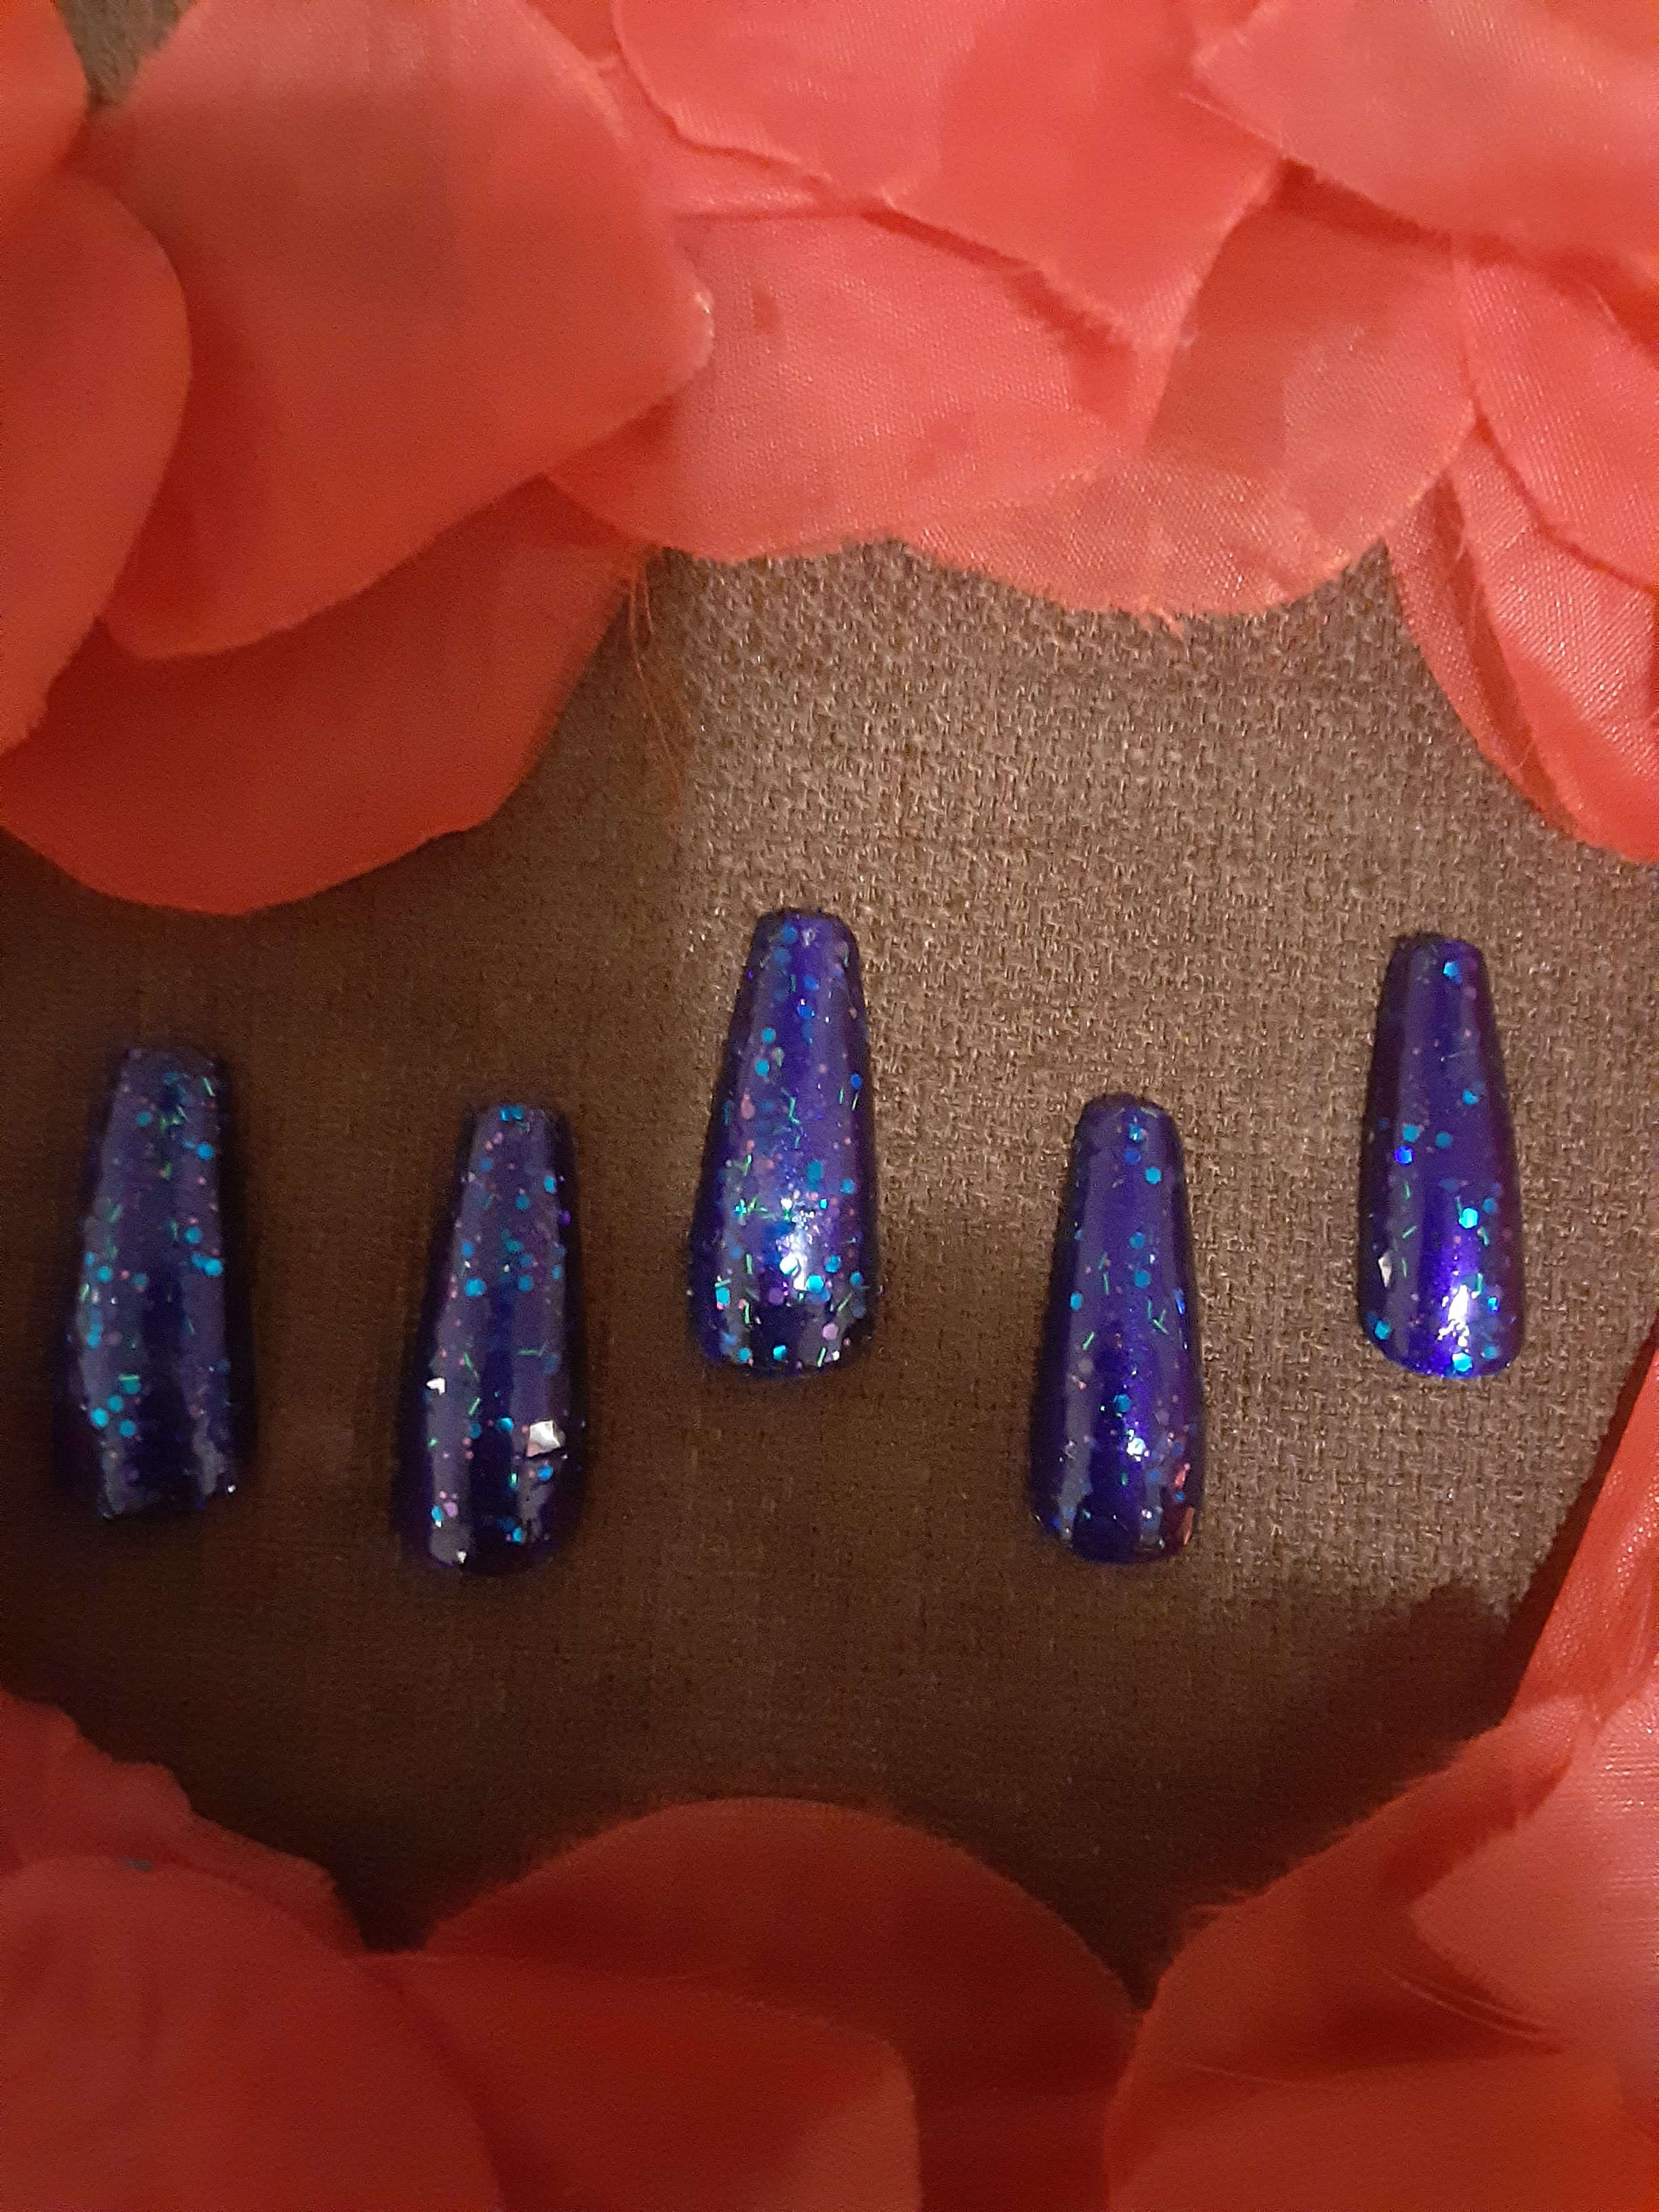 Red, Blue and Purple Water Marble Nails | Kerruticles